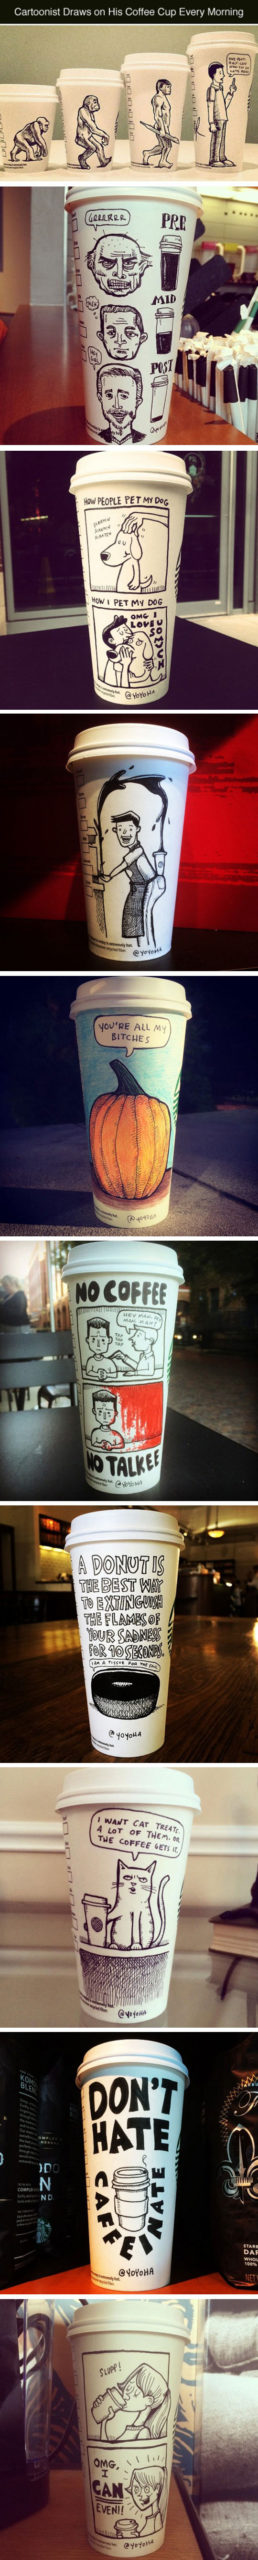 Cartoonist+gets+creative+with+his+coffee+cups